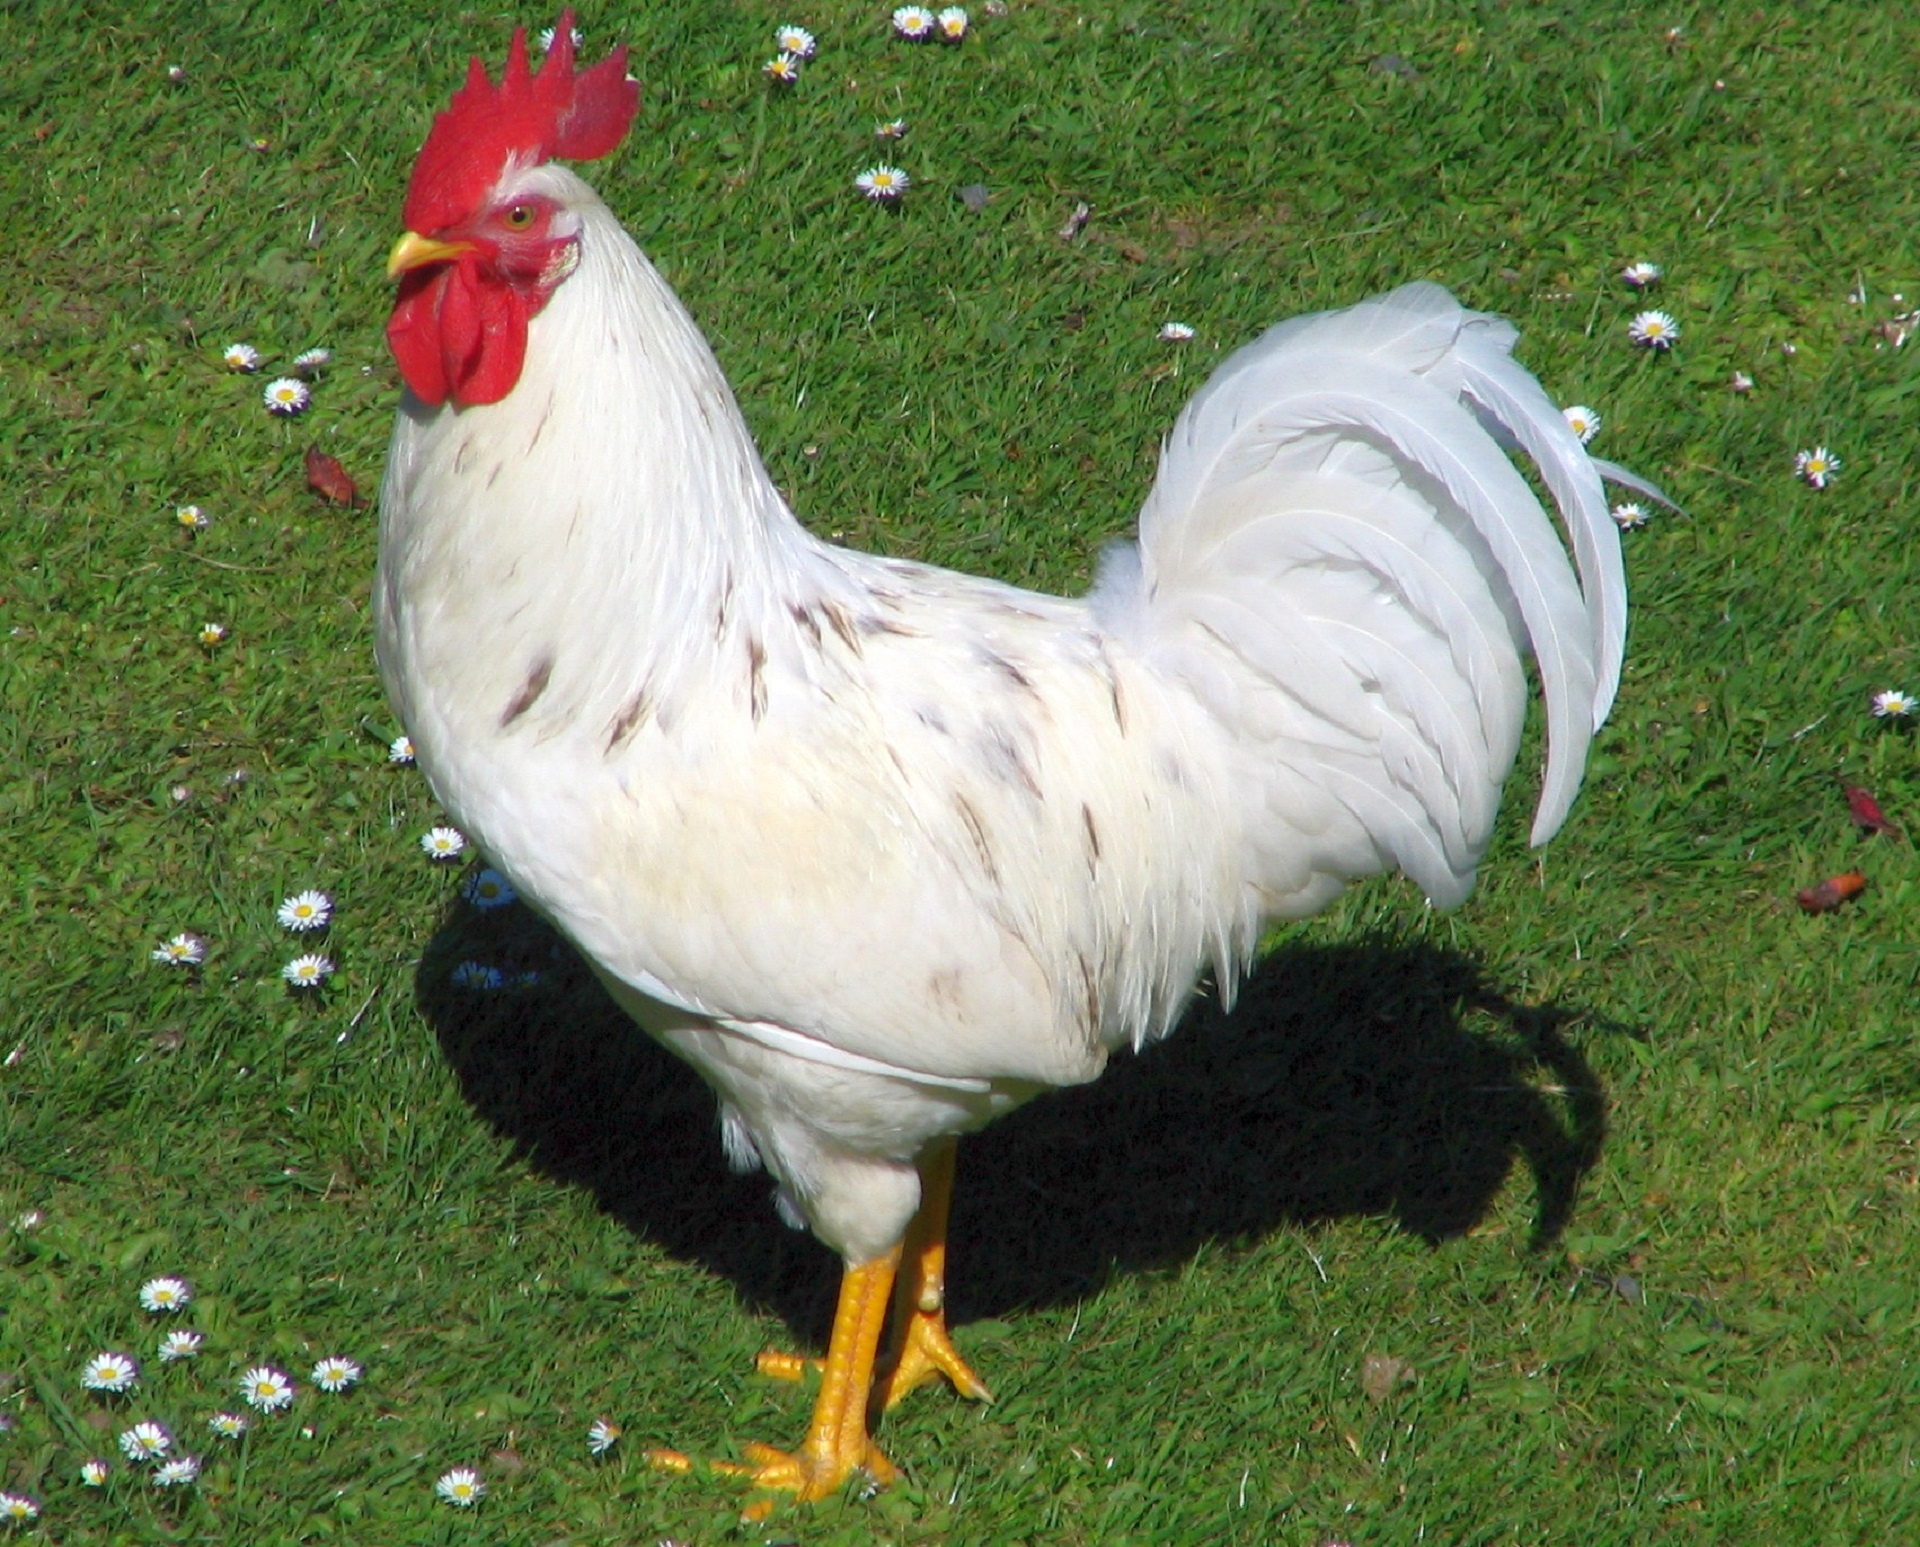 White rooster photos found on the web.